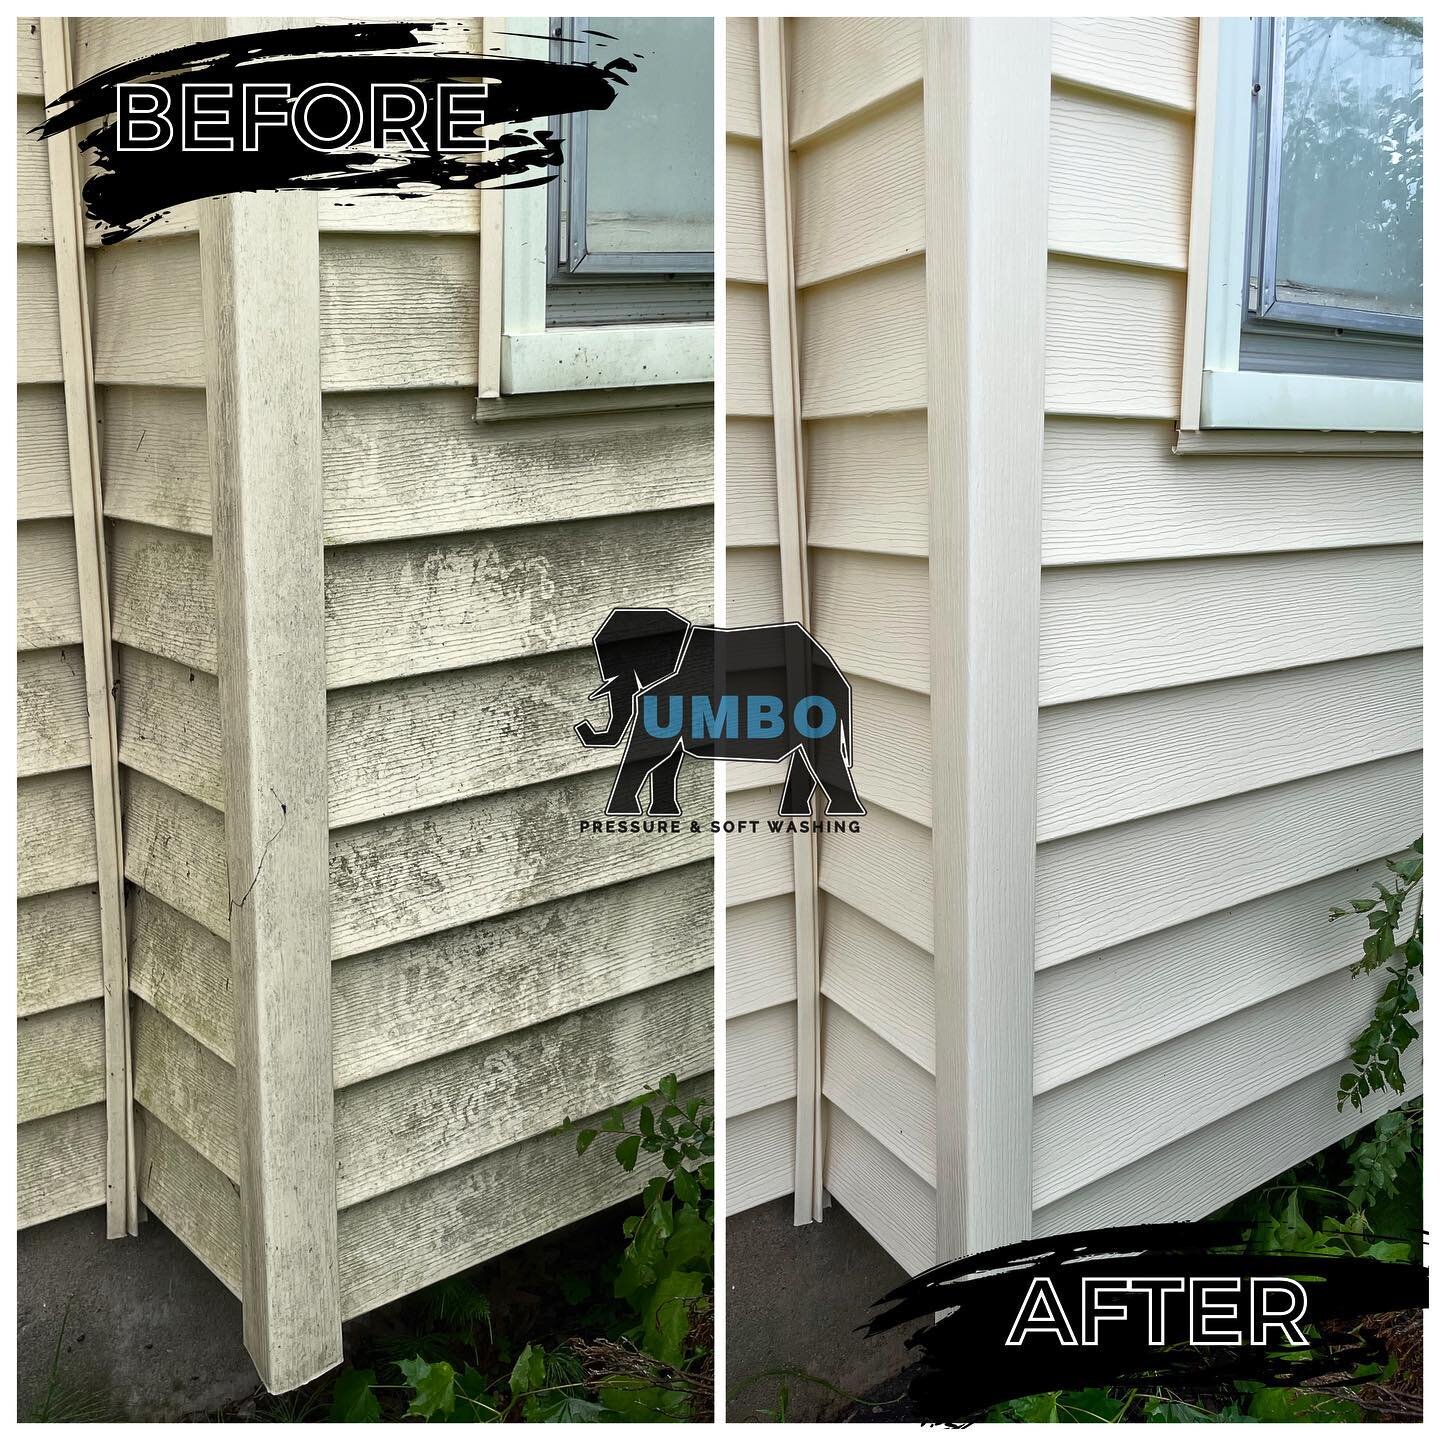 One of the best ROI&rsquo;s before selling your home is to make it clean and look like new! #beforeandafter #housewashing #grandrapidssmallbusiness #exteriorcleaningdoneright #lookslikenew